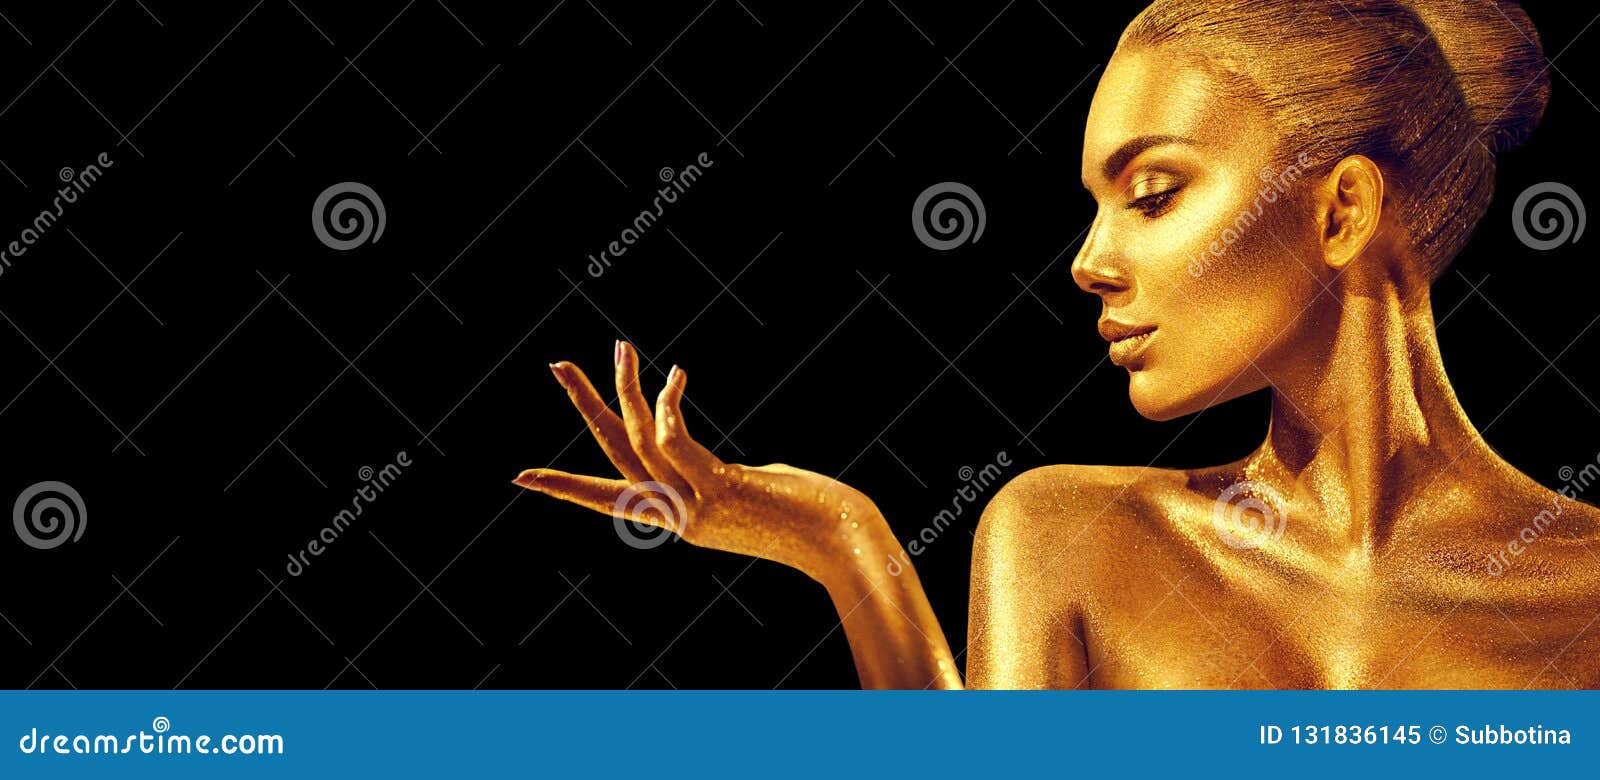 Golden woman. Beauty fashion model girl with golden skin, makeup, hair and jewellery on black background